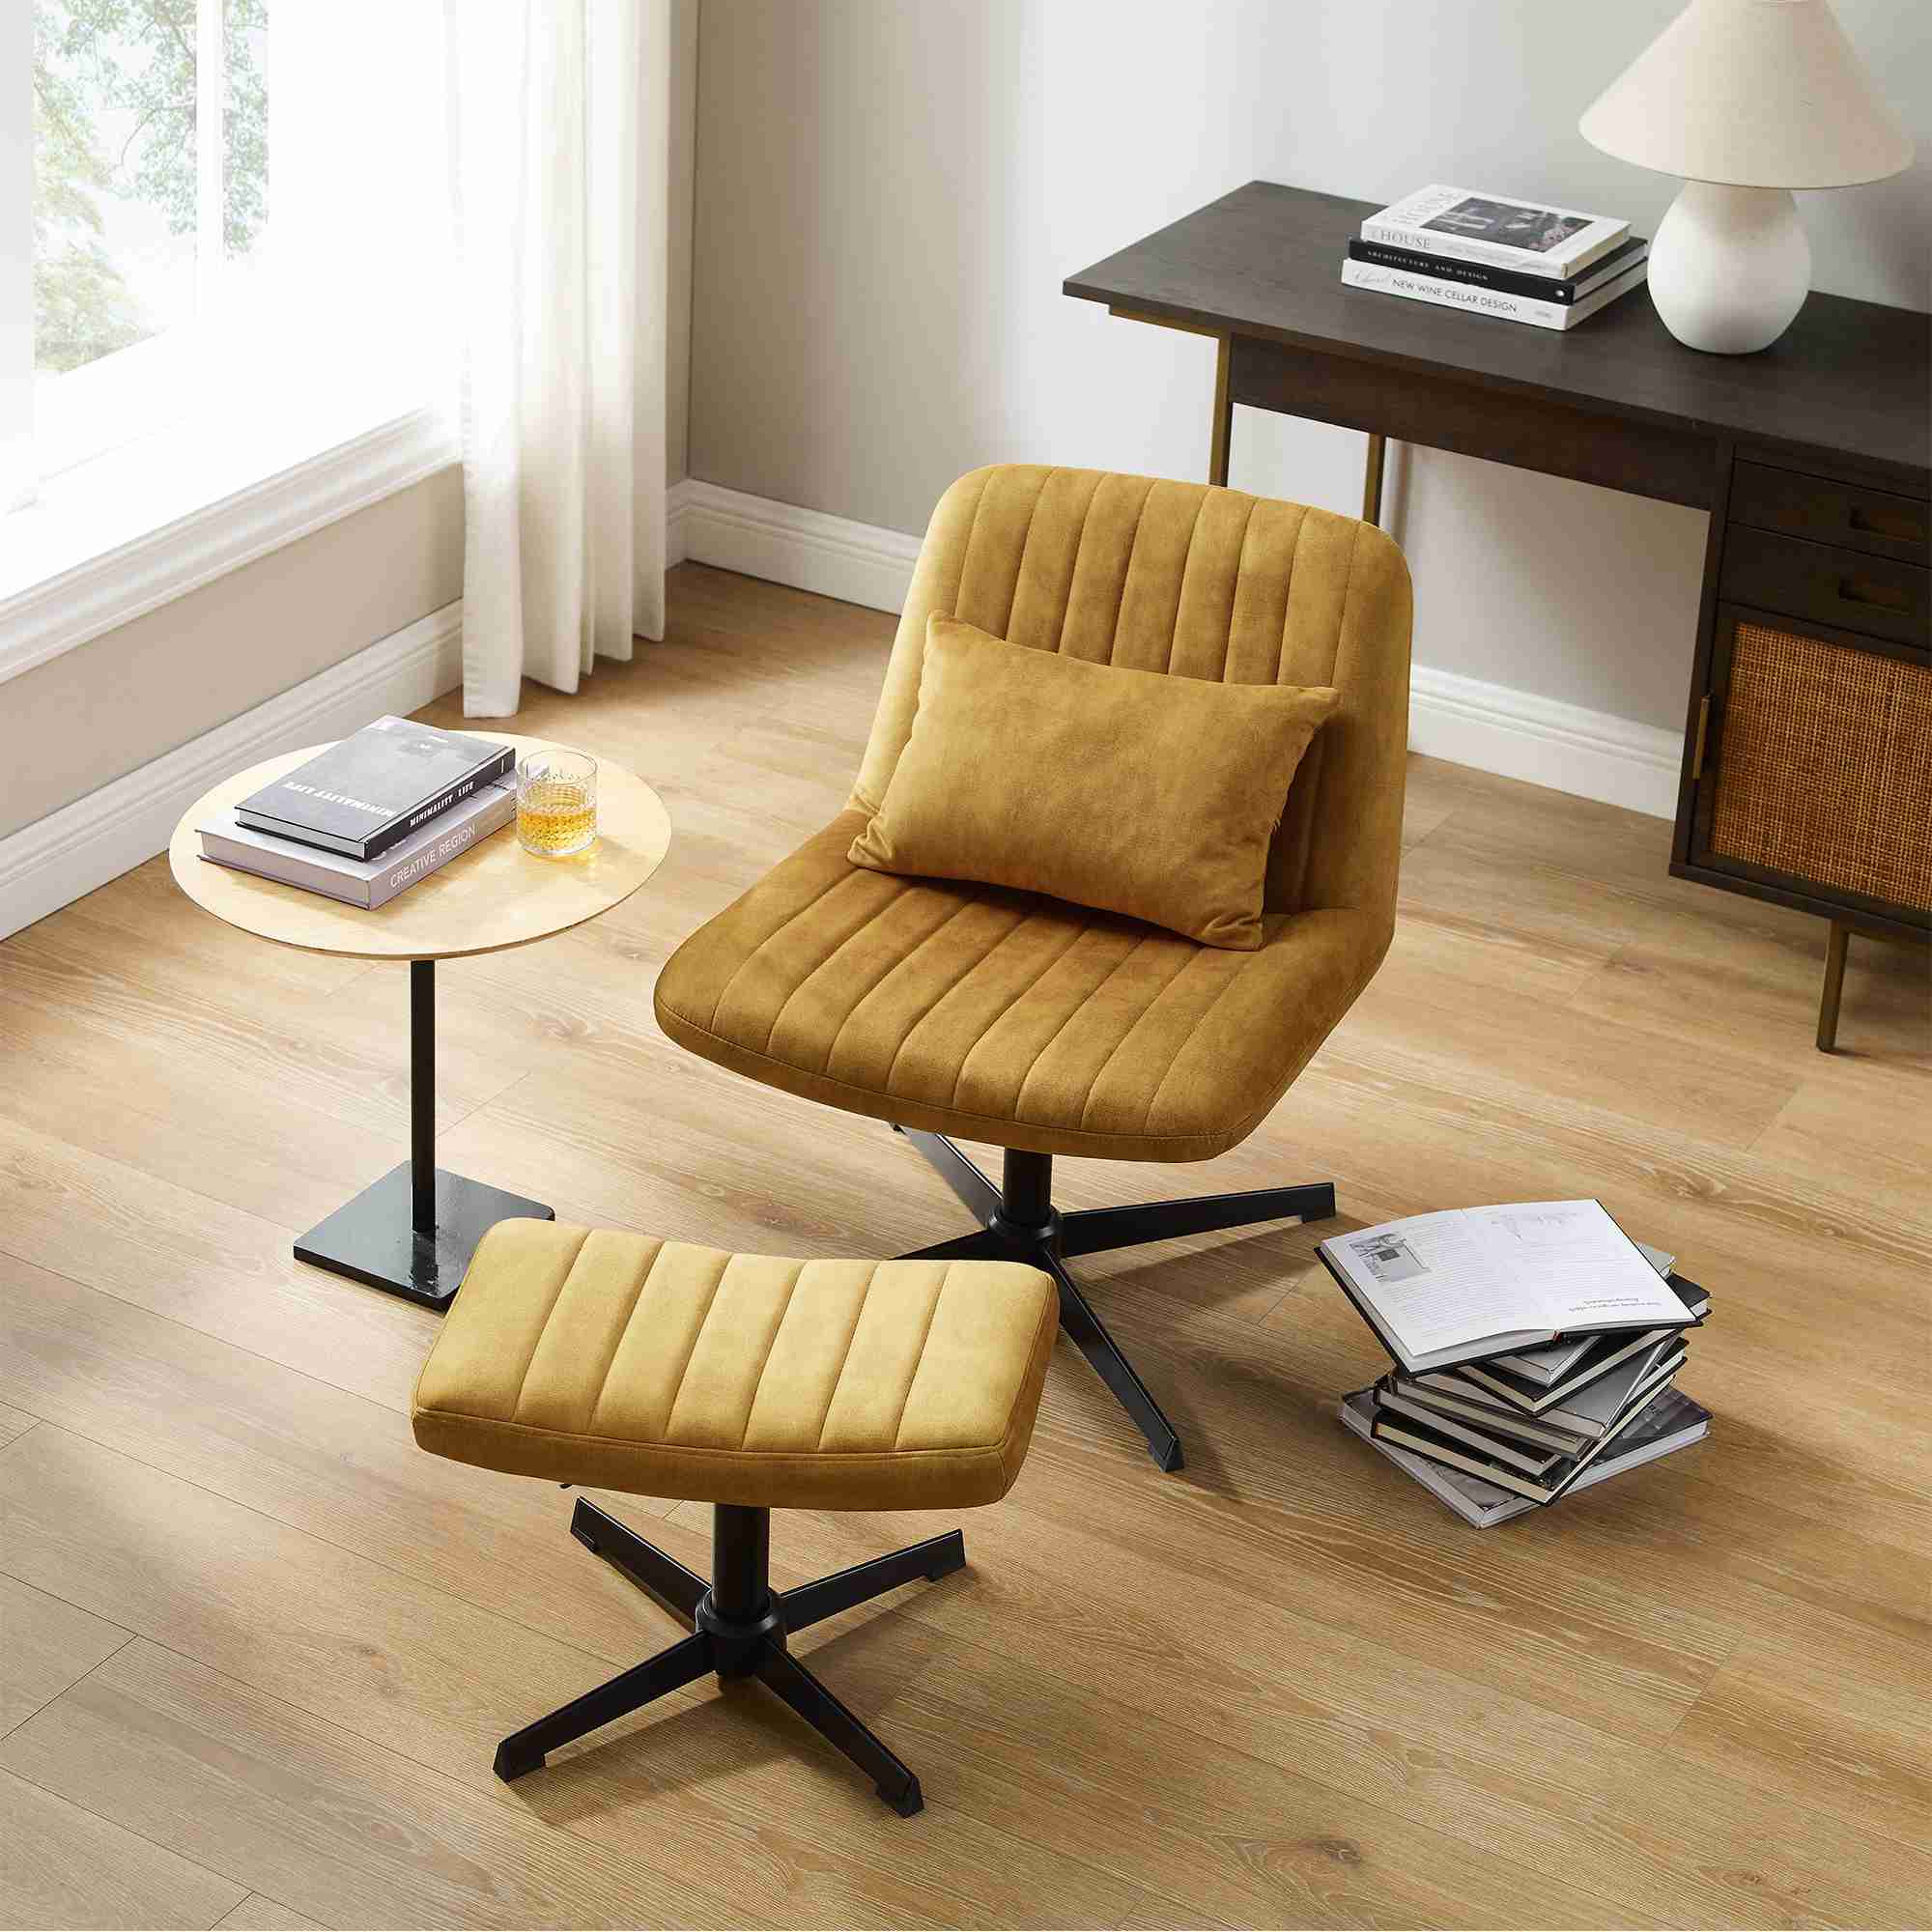 Learn How To Protect Wood Floors From Rolling Desk Chair